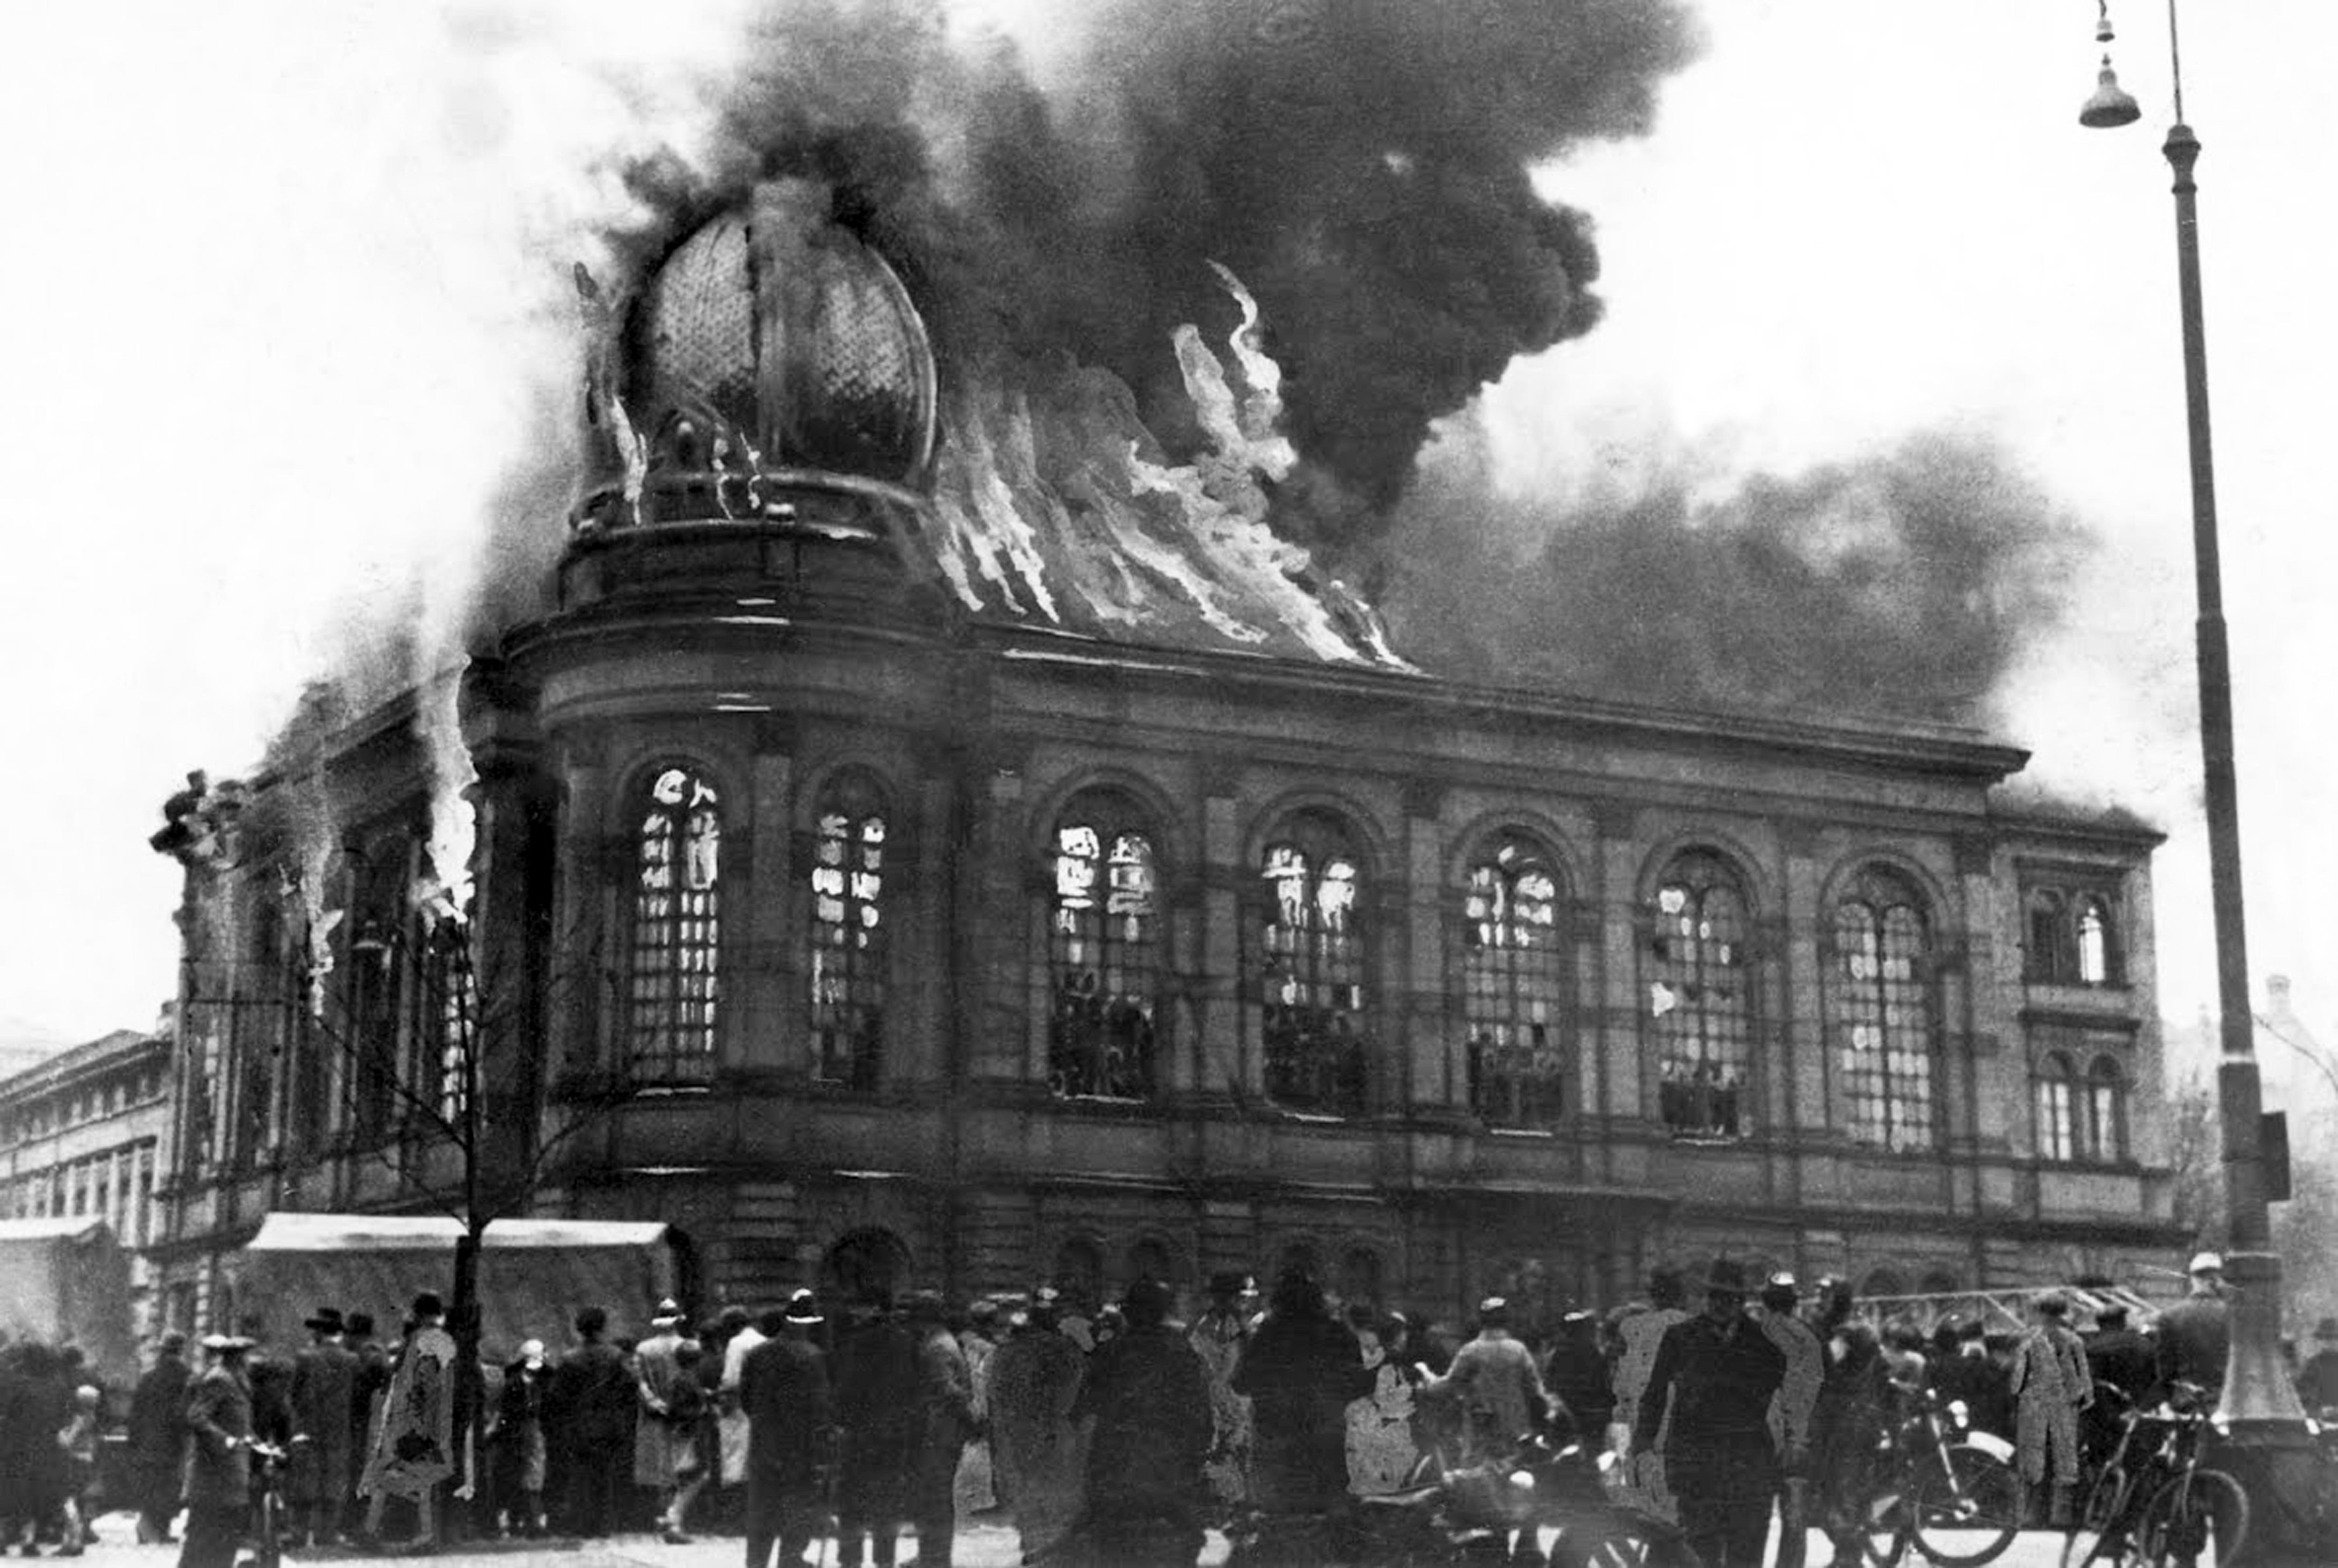 Remembering the tragic events of Kristallnacht on the 84th anniversary